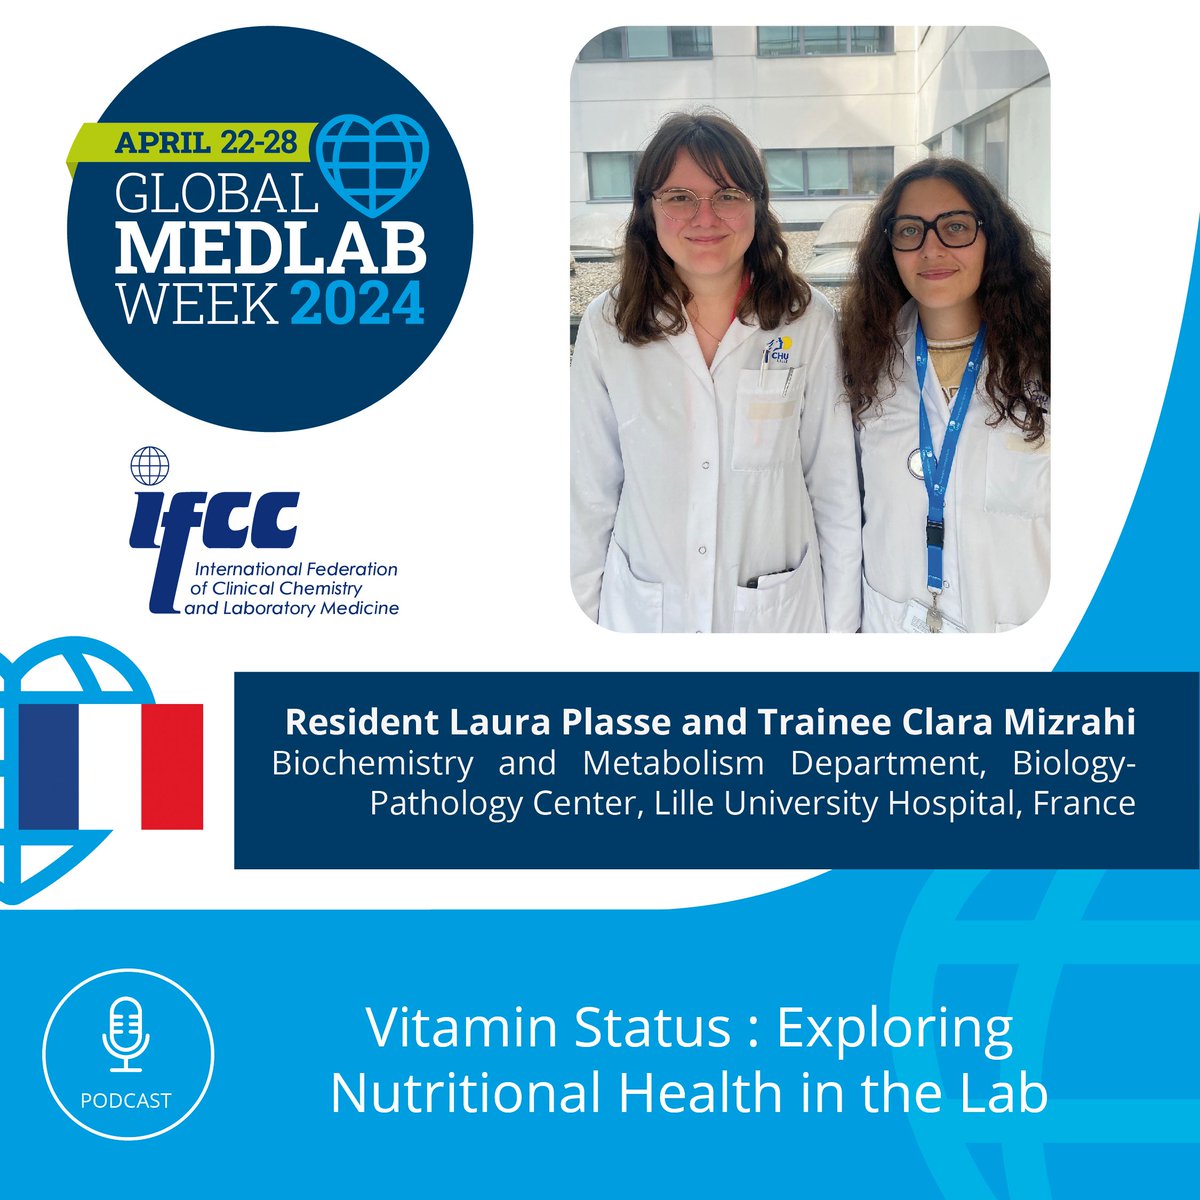 PODCAST: Vitamin Status : Exploring Nutritional Health in the Lab podcasters.spotify.com/pod/show/ifcc/… Laura Plasse (Resident) and Clara Mizrahi (Trainee) Biochemistry and Metabolism Department, Biology-Pathology Center, Lille University Hospital, France